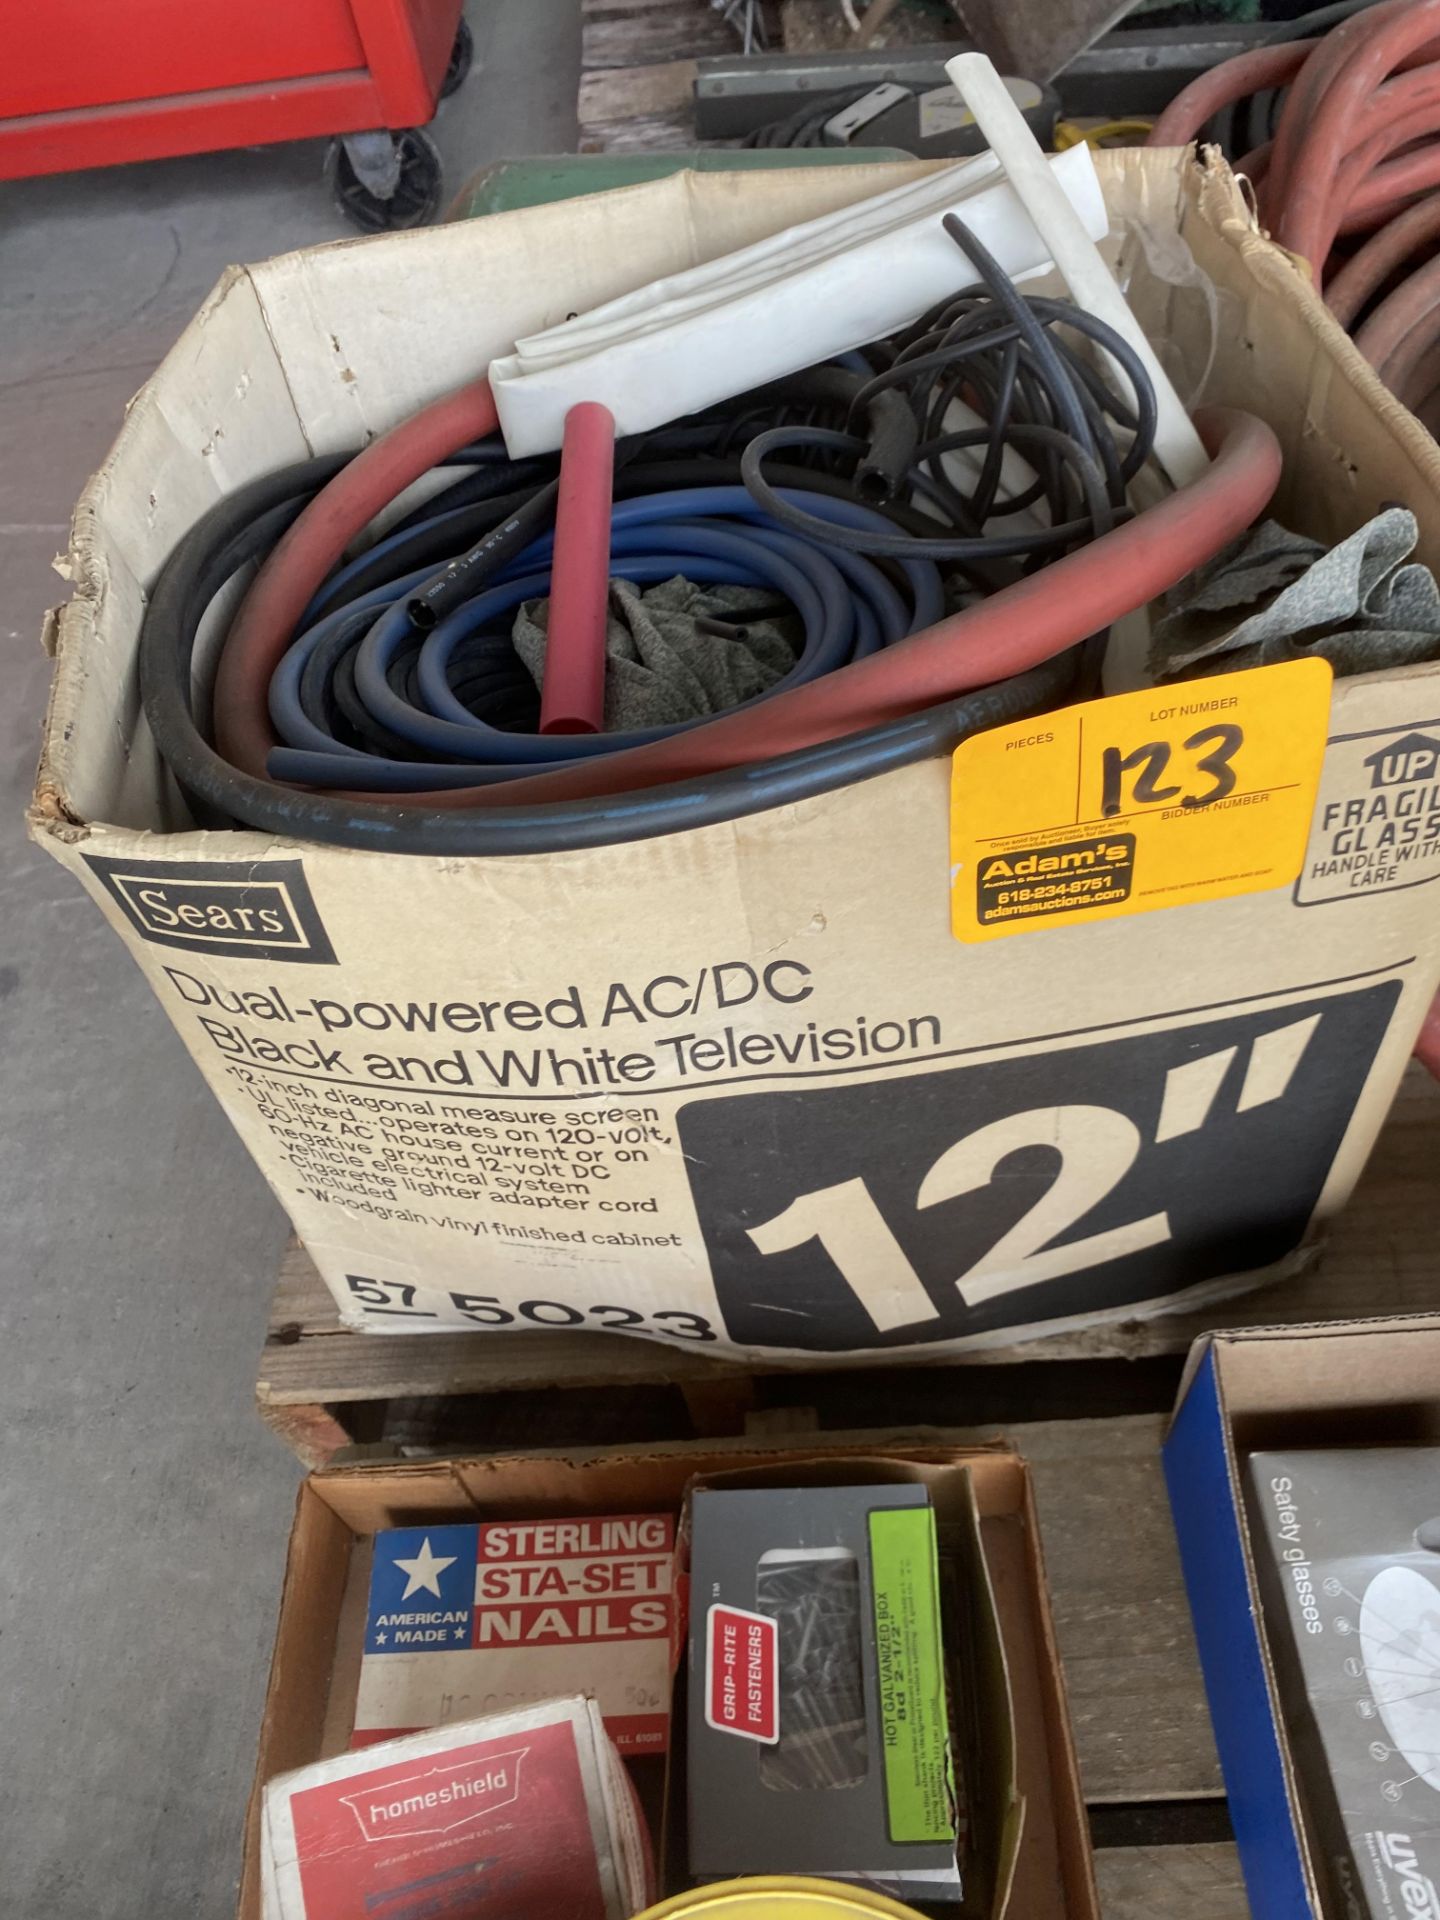 HOSES, DROP CORD, FREON